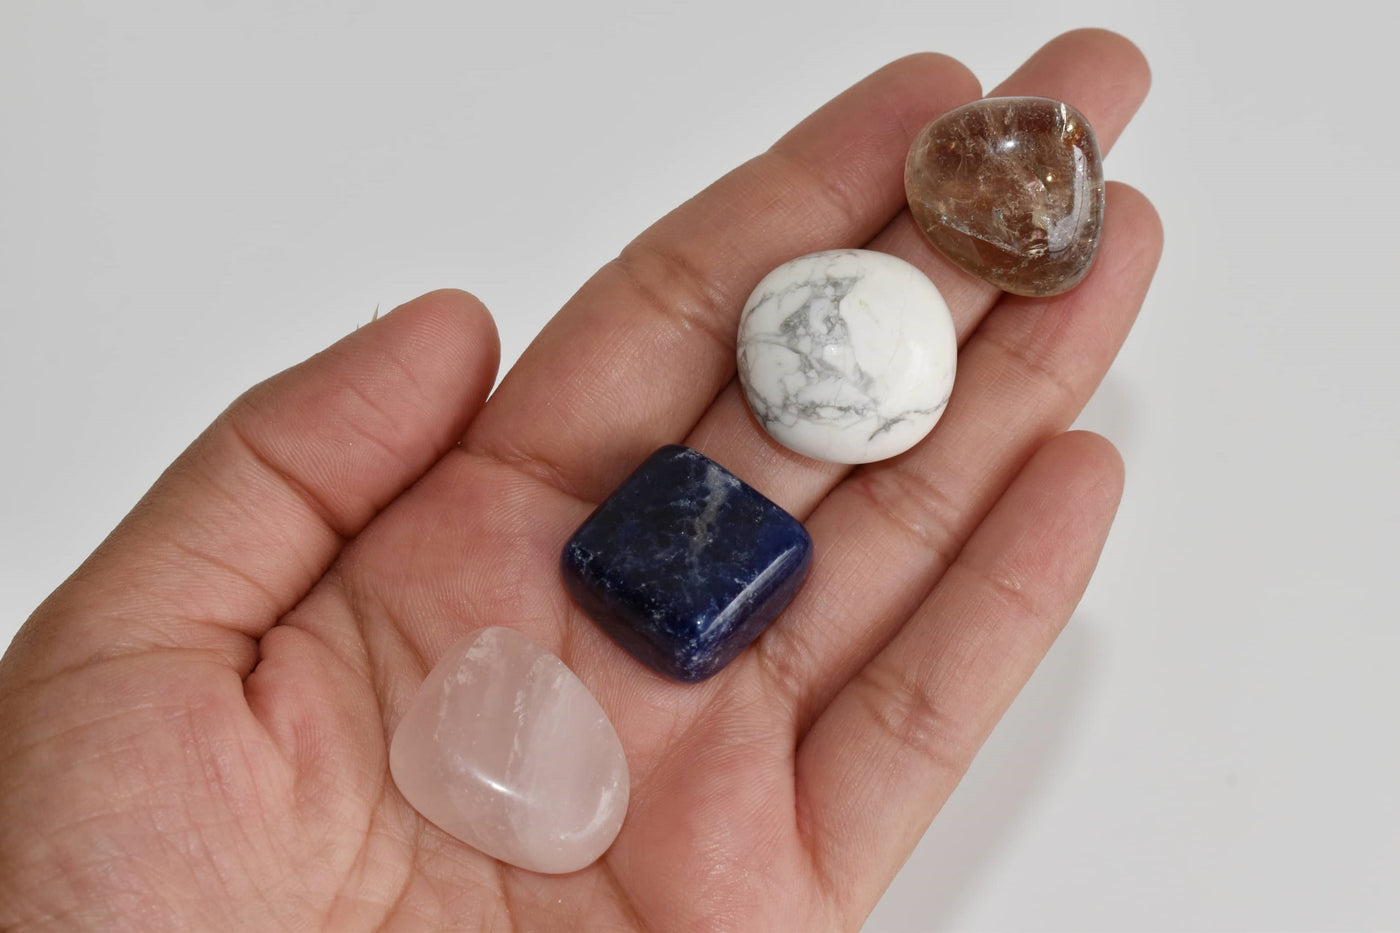 Release and Control ANGER Crystal Kit, Gemstone Tumble Kit, Anger Crystal Gift Set